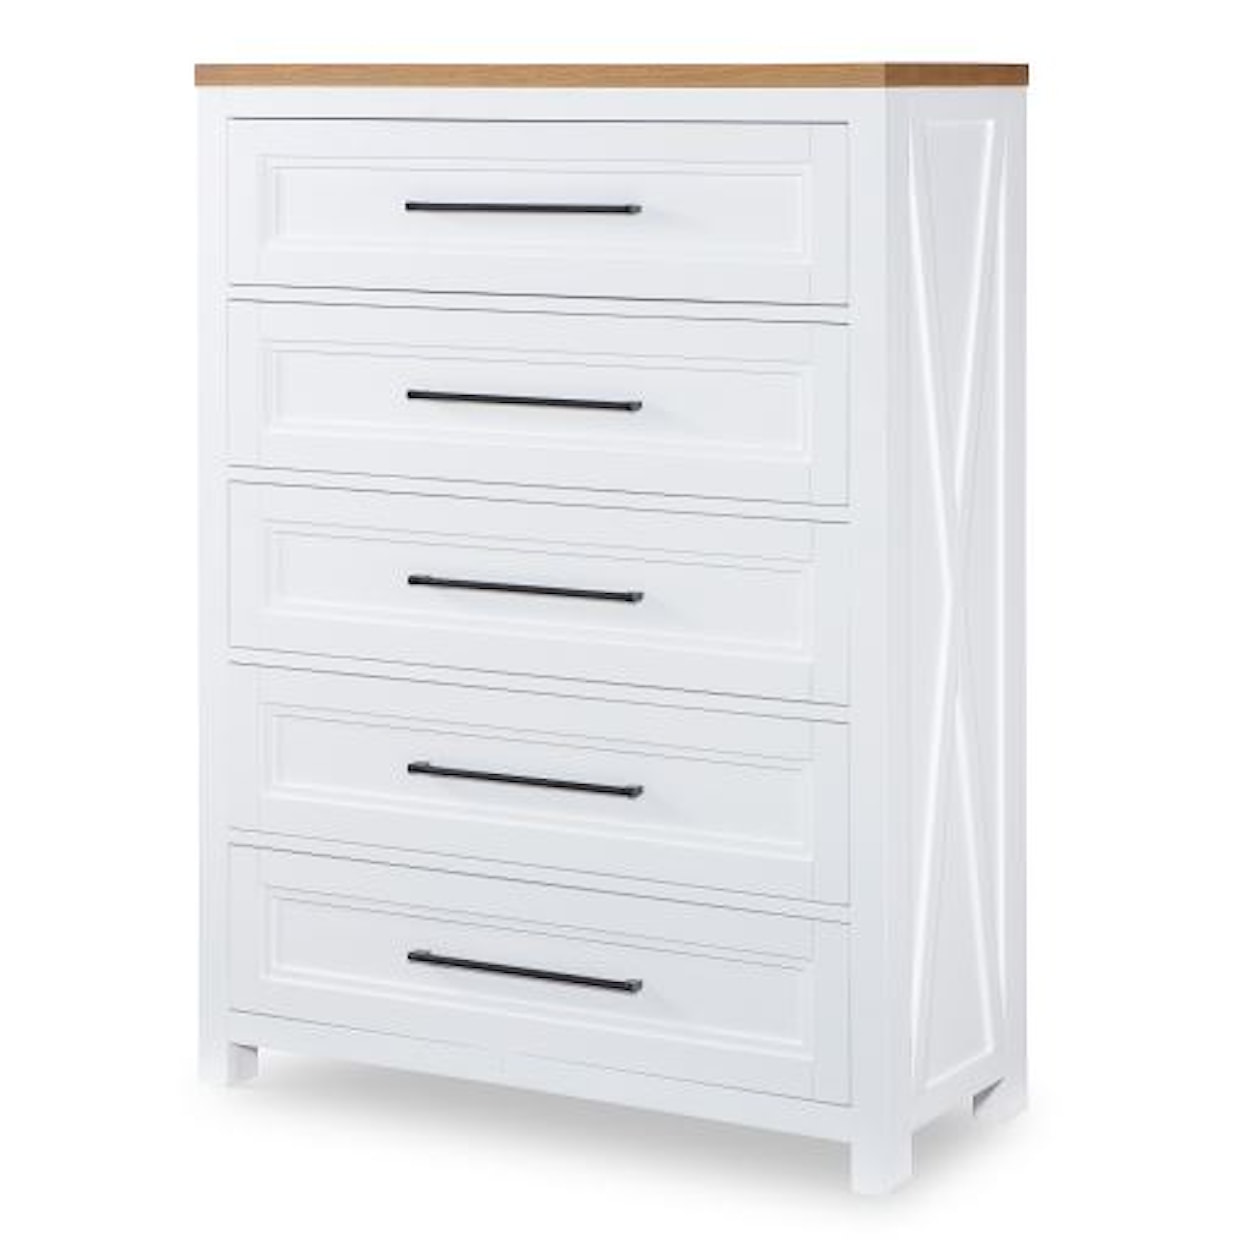 Legacy Classic Franklin Chest of Drawers